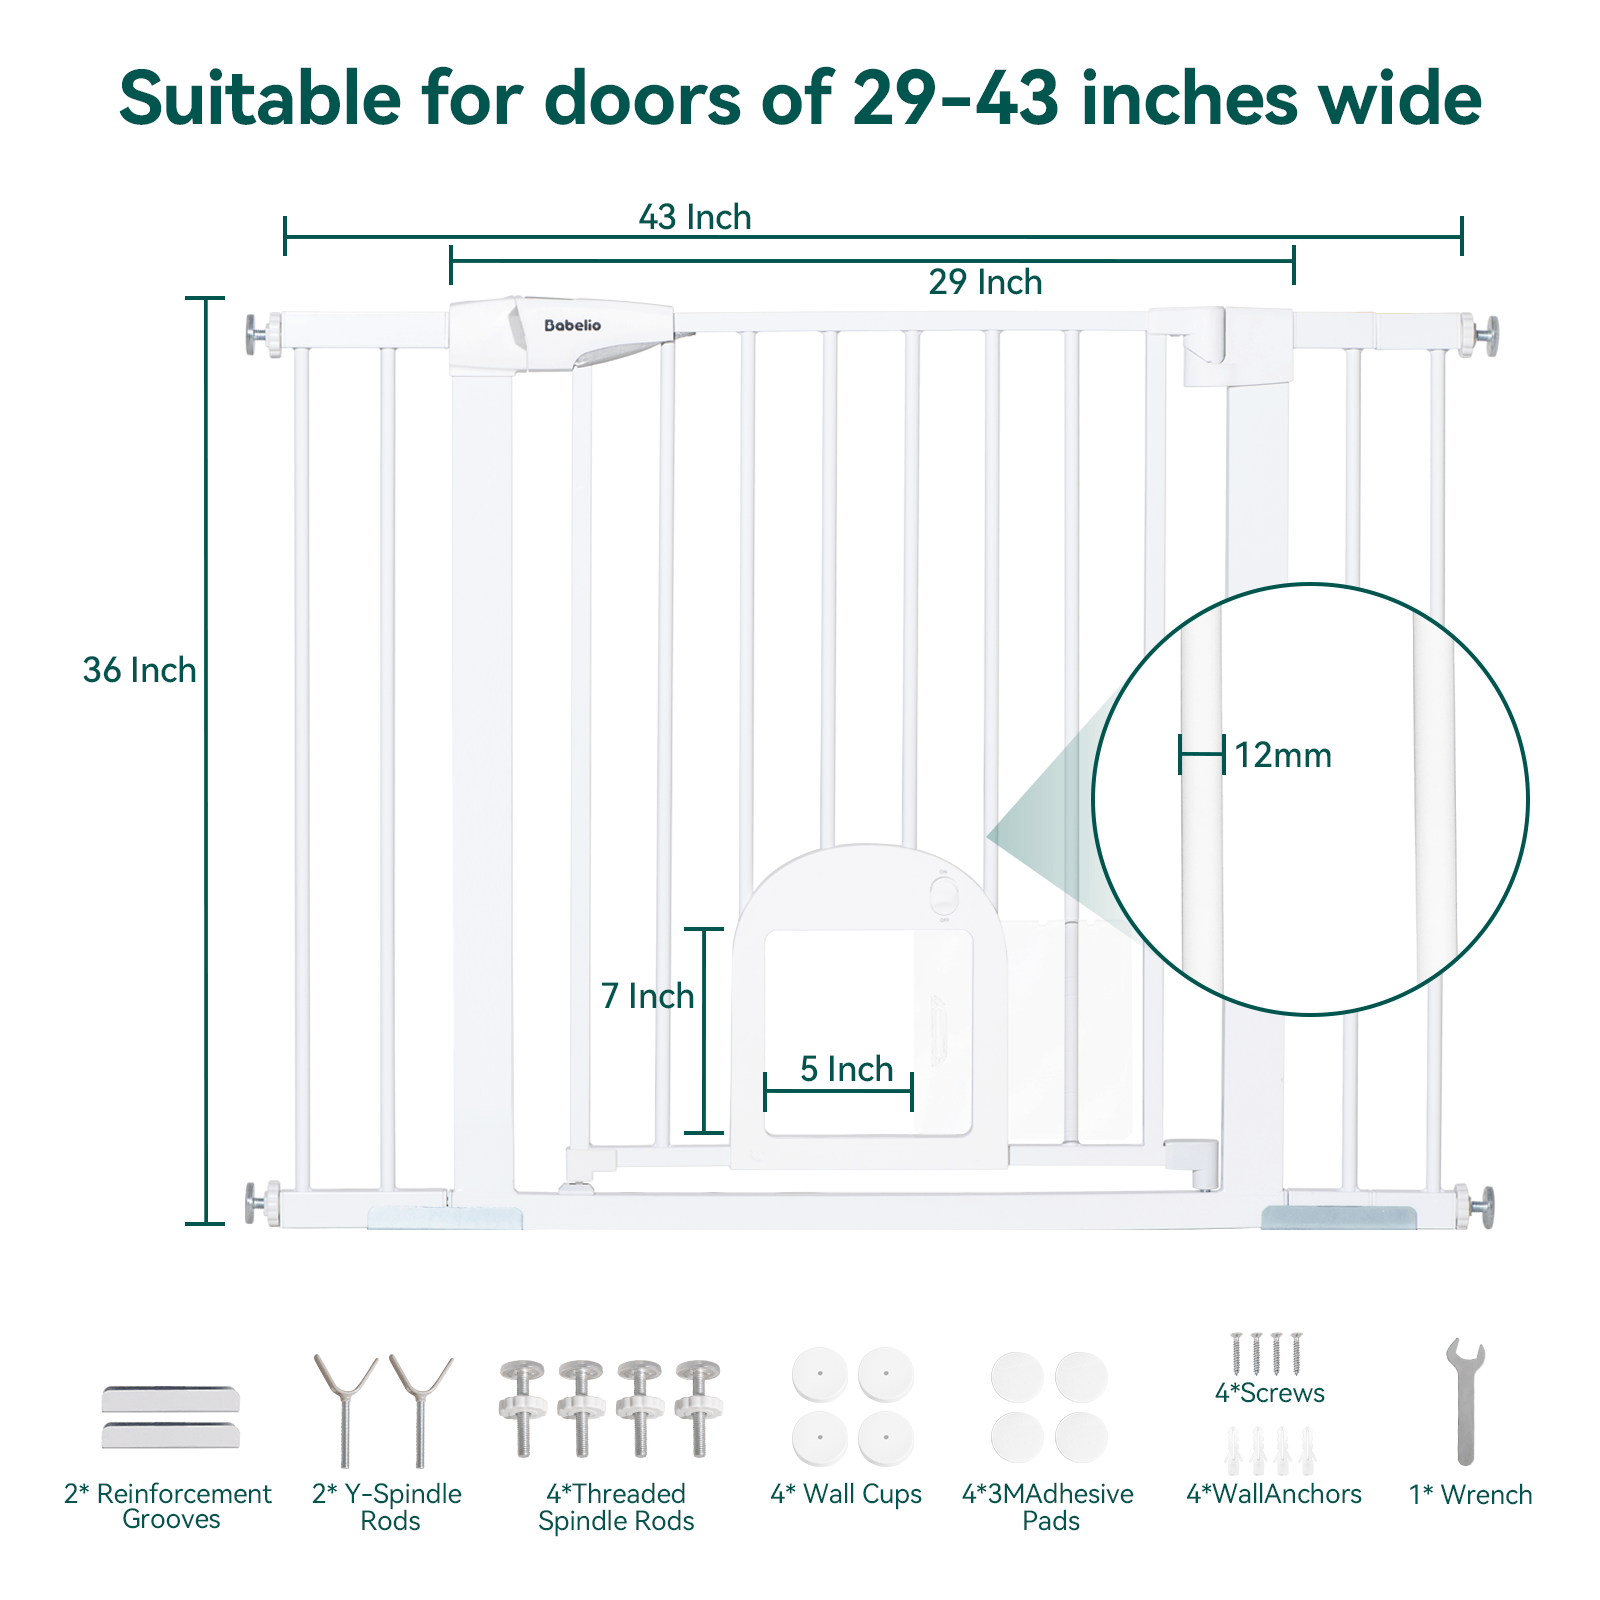 Babelio 36" High Baby Gate with Adjustable Cat Door – Auto-Close, 29-43" Wide, Ideal for Stairs and Doorways, Durable Design